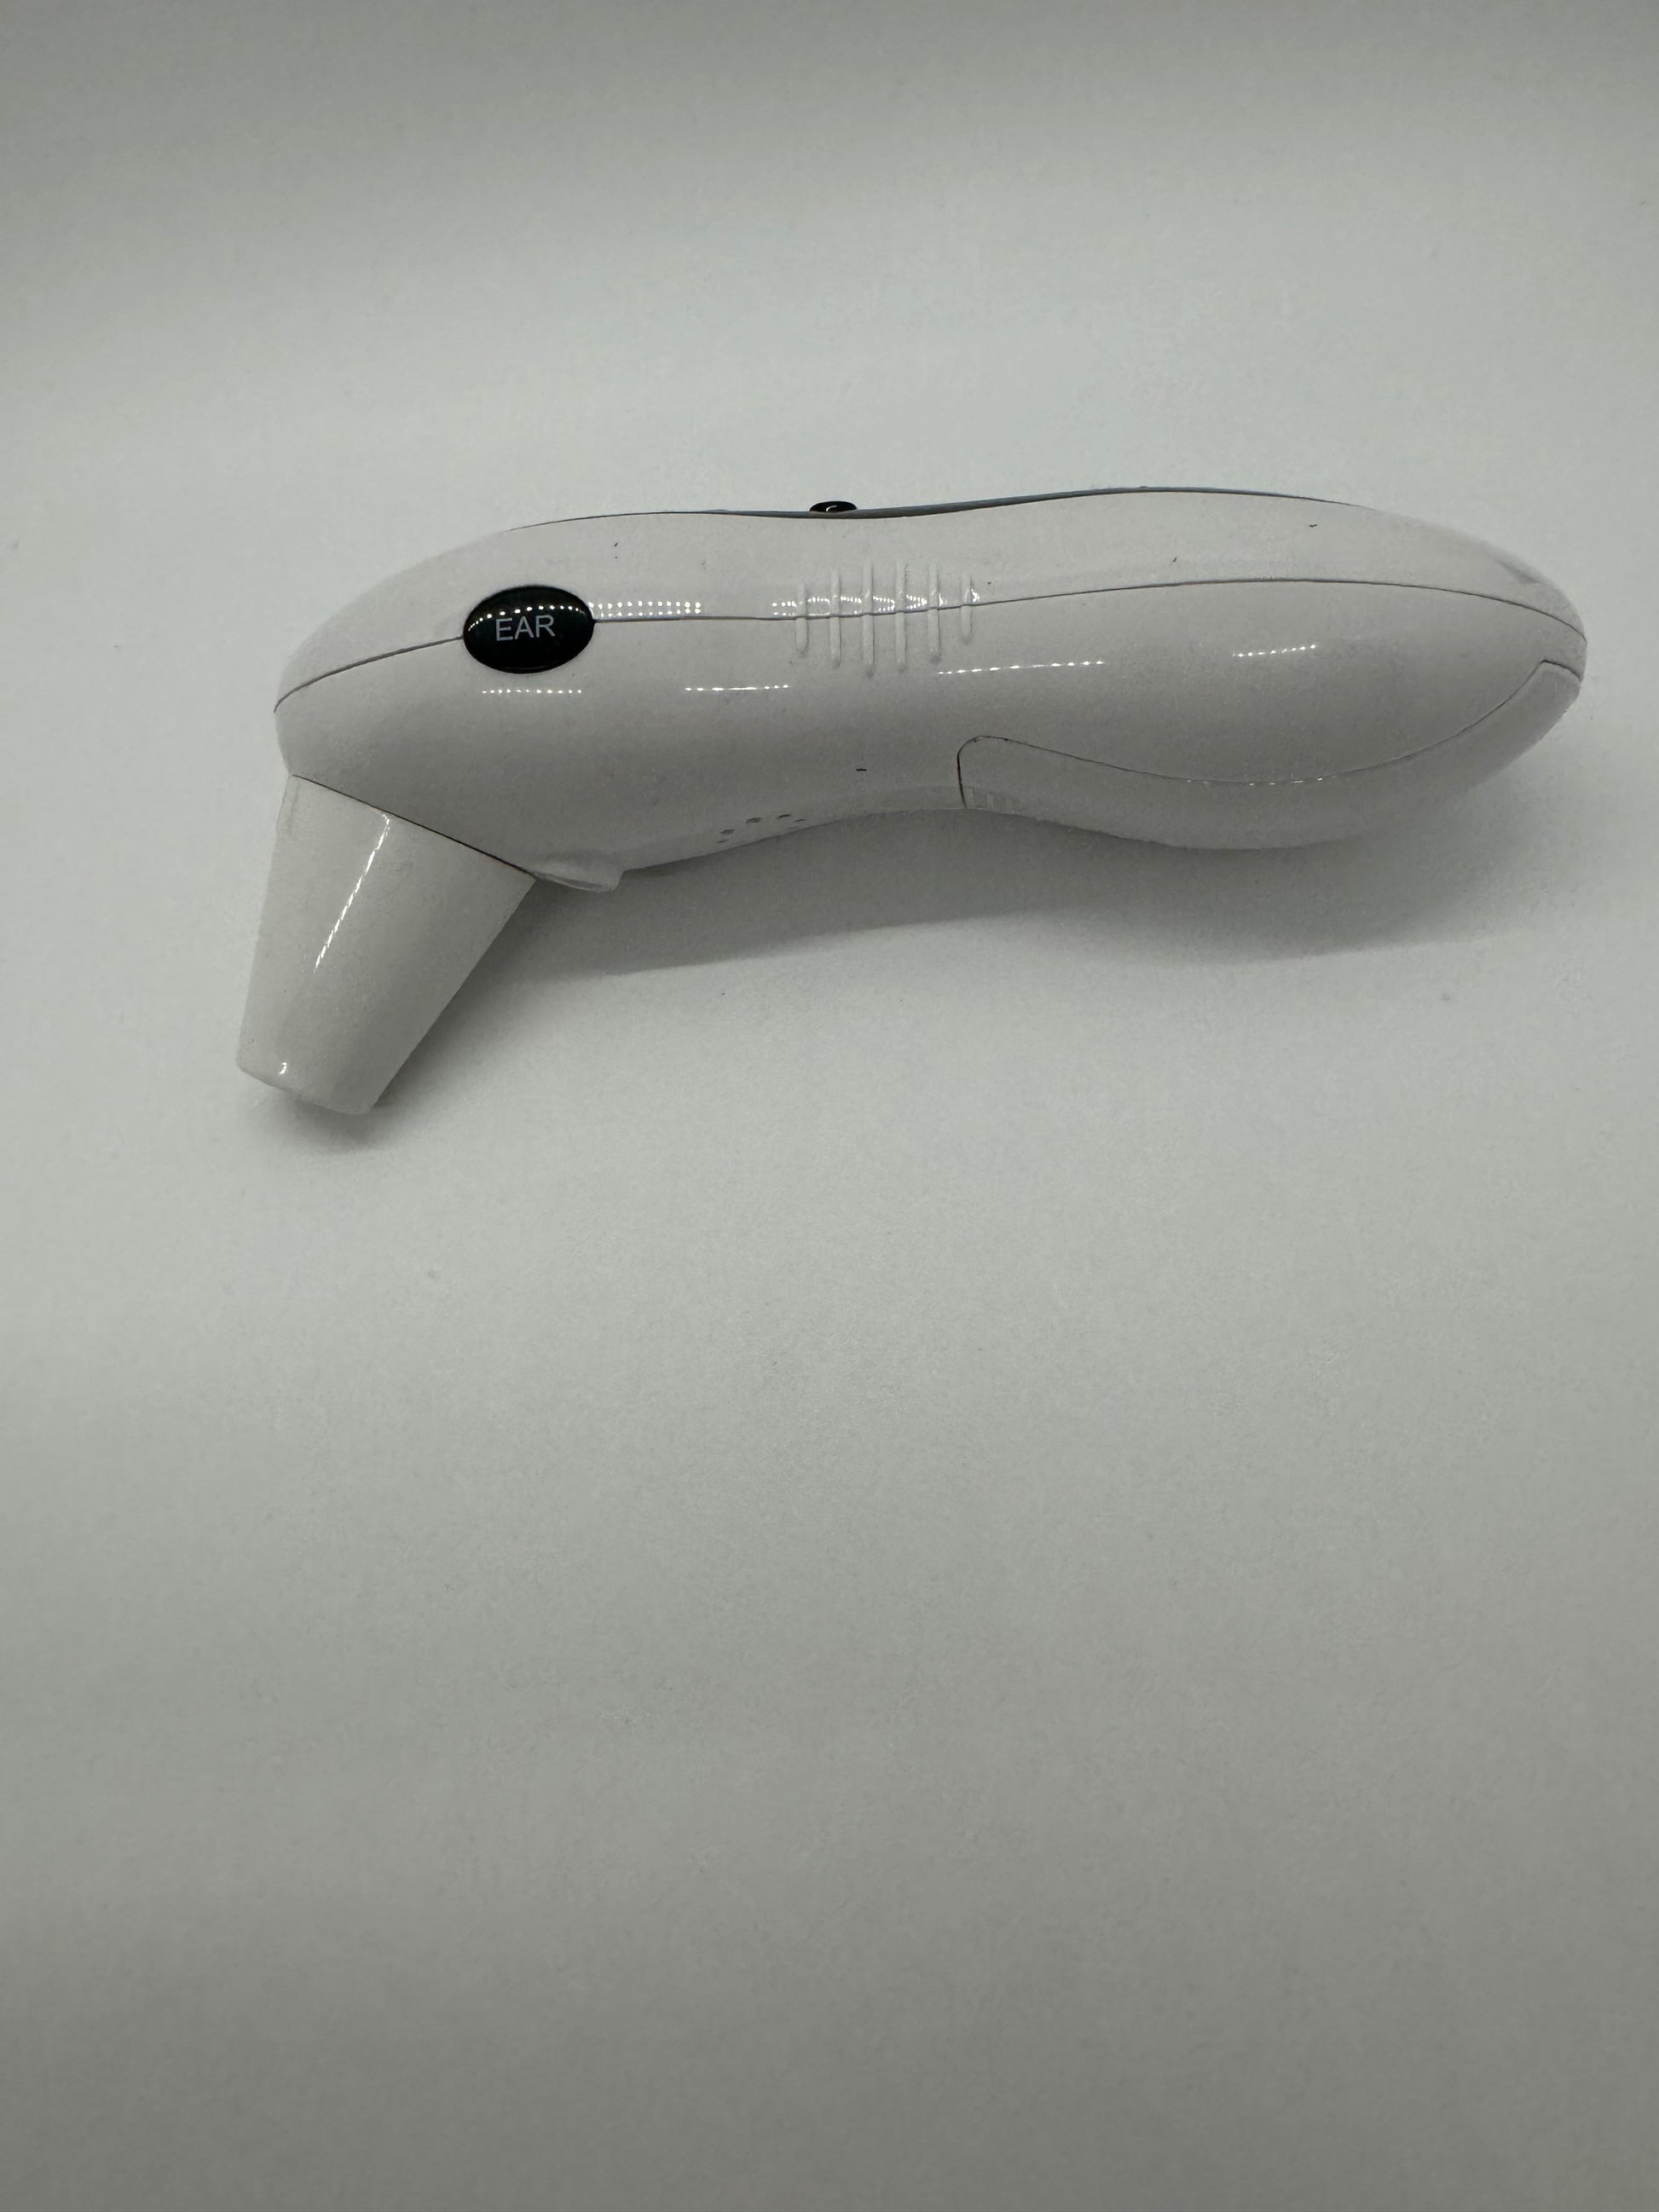 The picture shows a device that appears to be an ear thermometer. It is placed on a plain white background. The device is light grey in color and has an ergonomic design, shaped to fit comfortably in the hand. The top part of the device is elongated and curves down into a pointed tip, which is likely the part that is inserted into the ear. On the side of the device, there is a small round black button with the word "EAR" written in white letters. There is also a grip texture on the handle for easy